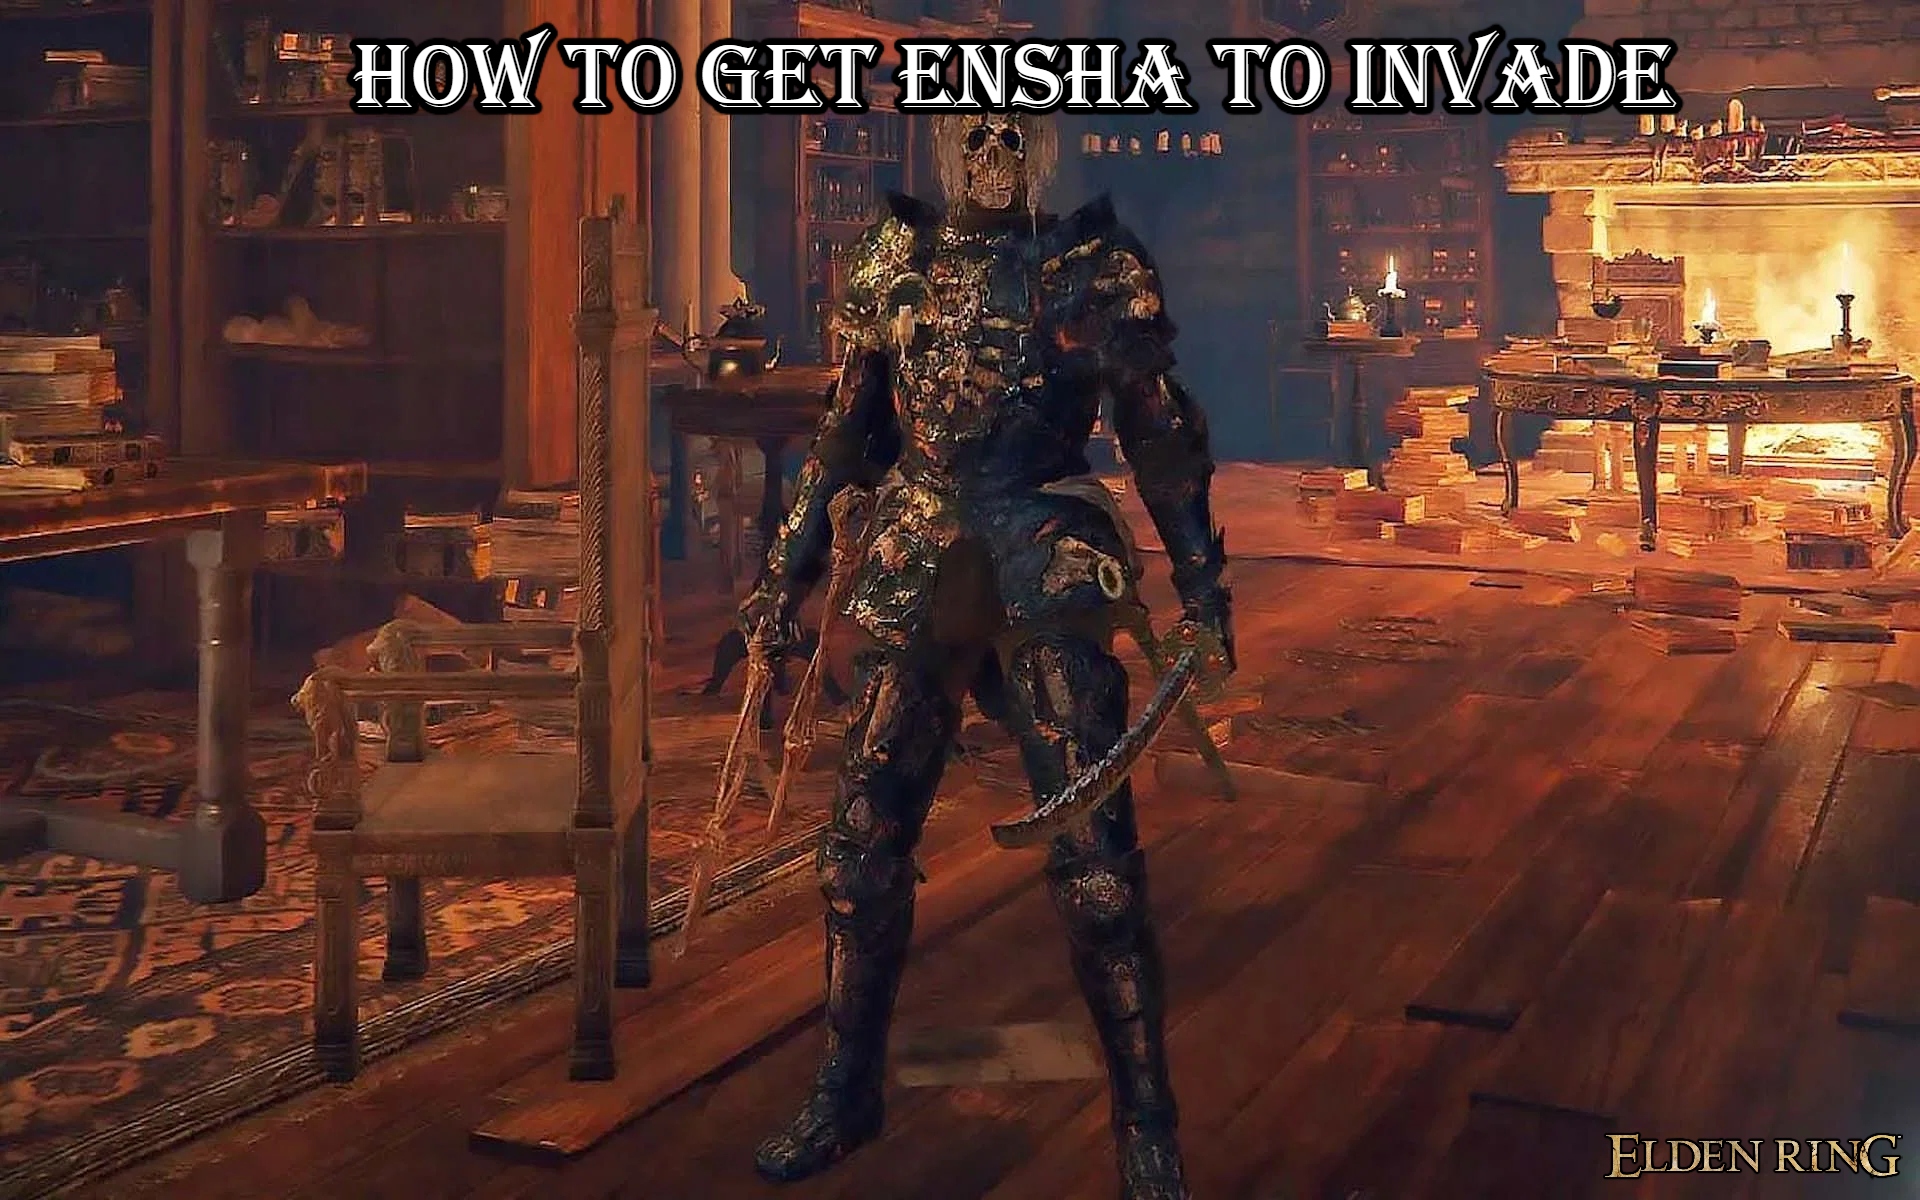 You are currently viewing Elden Ring: How To Get Ensha To Invade